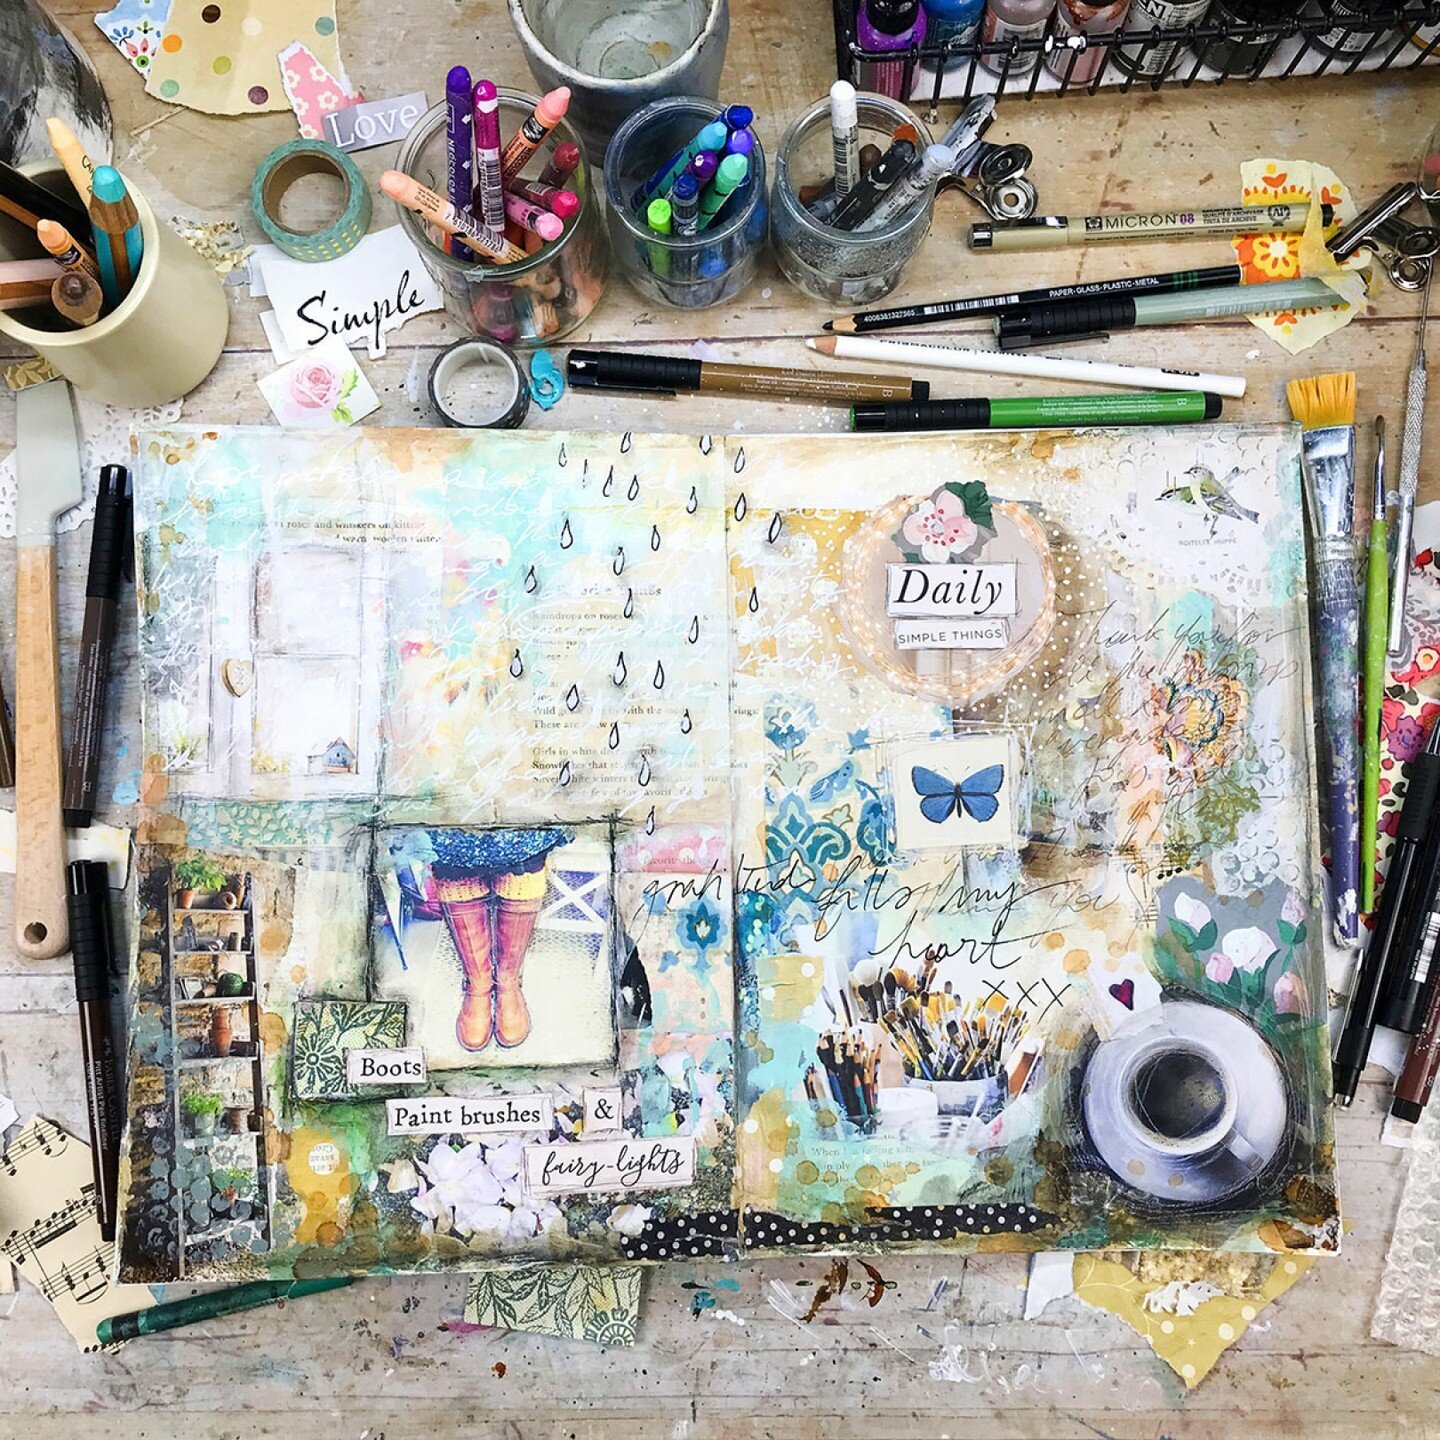 🦋 Creative tip of the week: Take pictures to use in your art! (here are a few examples from my art journals)

Using personal pictures for collage in your mixed media art is so fun and rewarding, plus it means you don't have to worry about copyright!